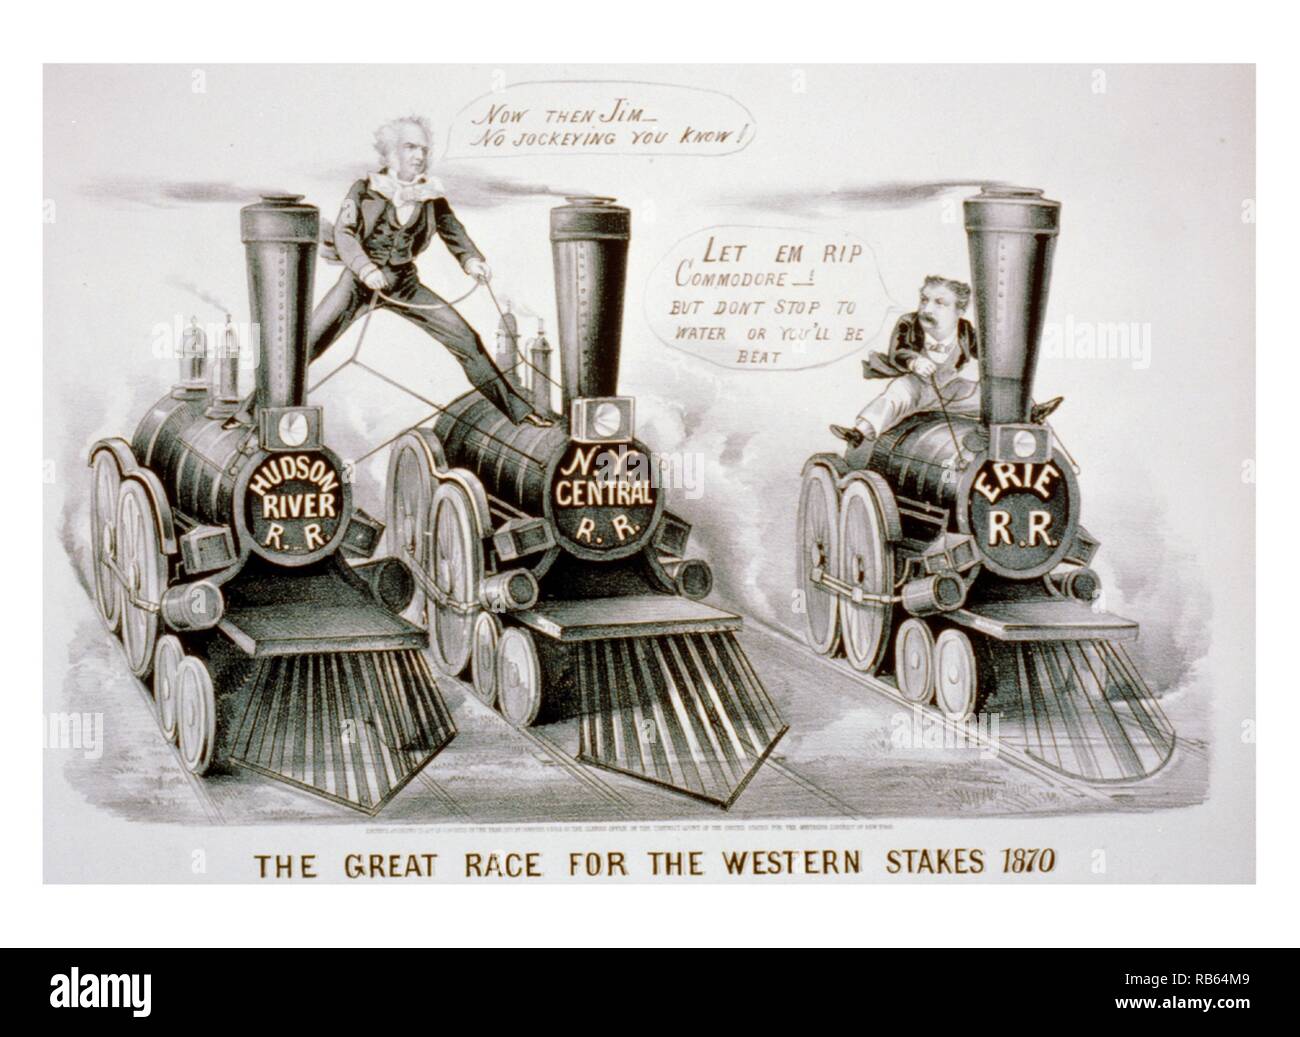 Lithograph created by Currier and Ives depicts Cornelius Vanderbilt and James Fisk in a race for control of New York's rails. Throughout 1868 and 1869, the two men had fought for control of the Erie Railroad. (See also 'The Statue Unveiled,' no. 1869-1.) Here, Vanderbilt straddles his two railroads, the 'Hudson River R.R.' and the 'New York Central R.R.', admonishing his competitor, 'Now then Jim--No Jockeying You Know!' The dwarf like Fisk, sitting astride the 'Erie R.R.', replies, 'Let em rip Commodore!--But Don't Stop to Water or You'll be Beat.' Dated 1870 Stock Photo